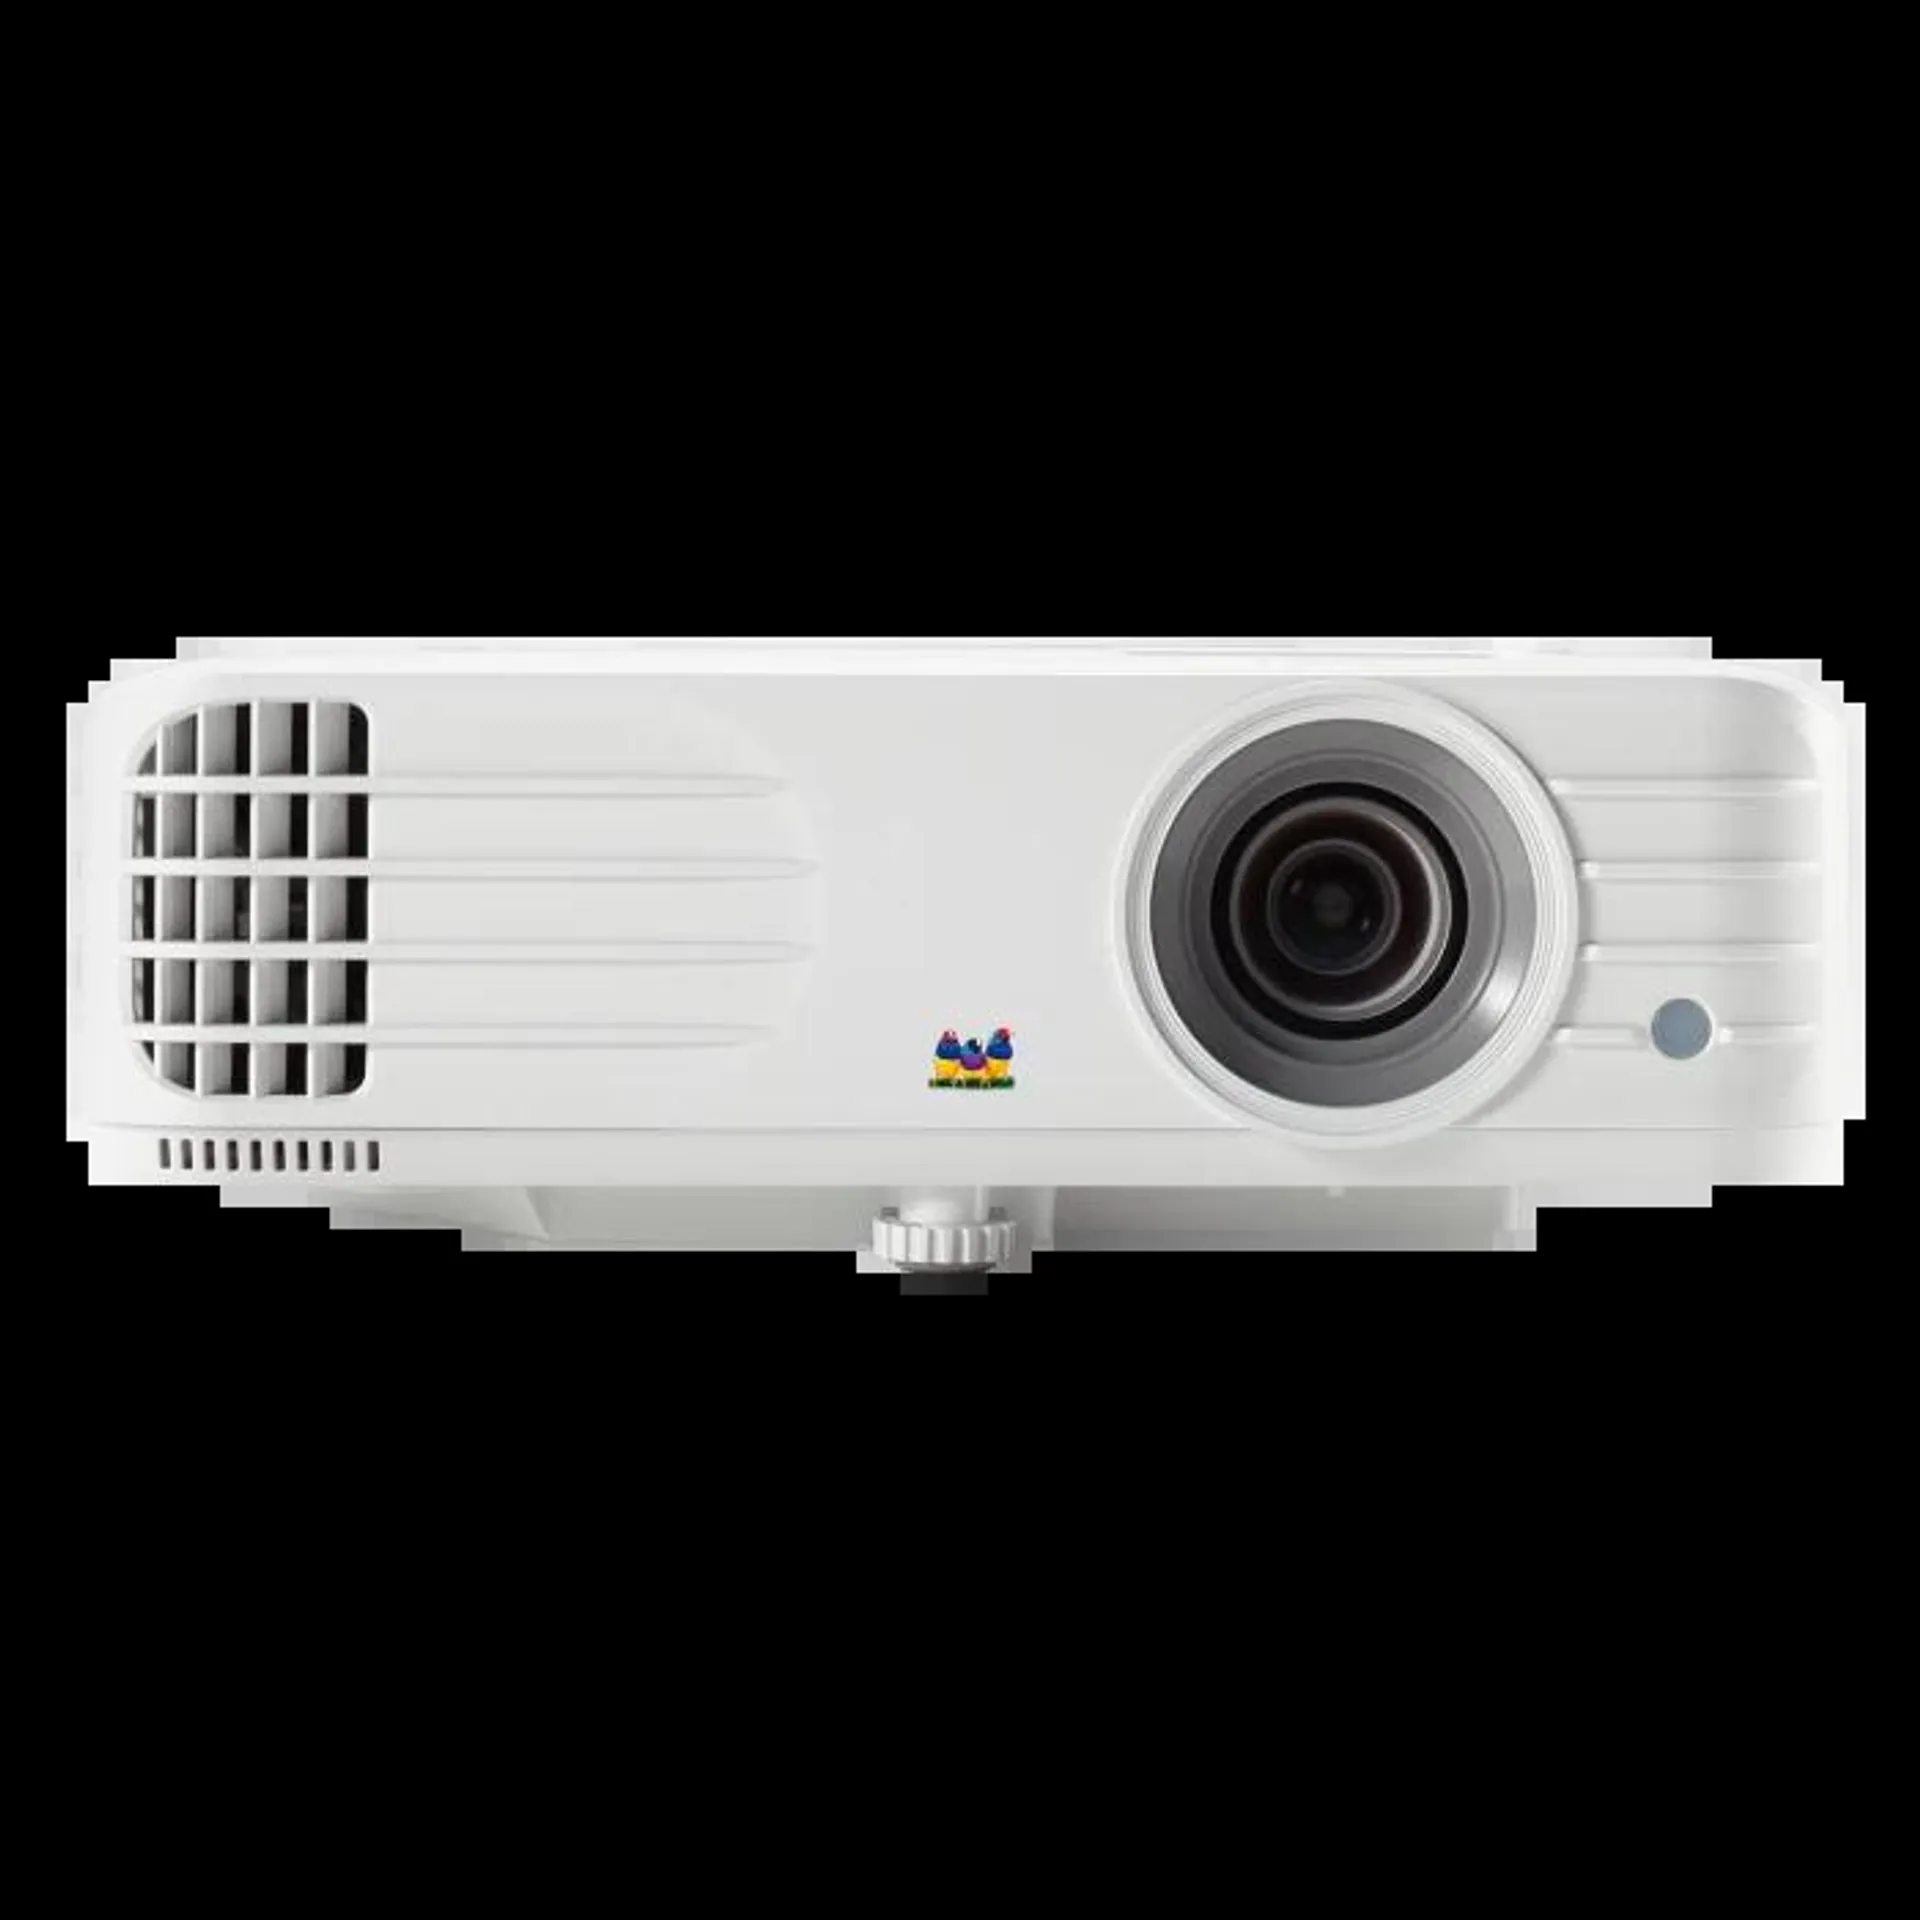 PG706HD - 4000 Lumens 1080p Projector with RJ45 LAN Control, Vertical Keystone and Optical Zoom